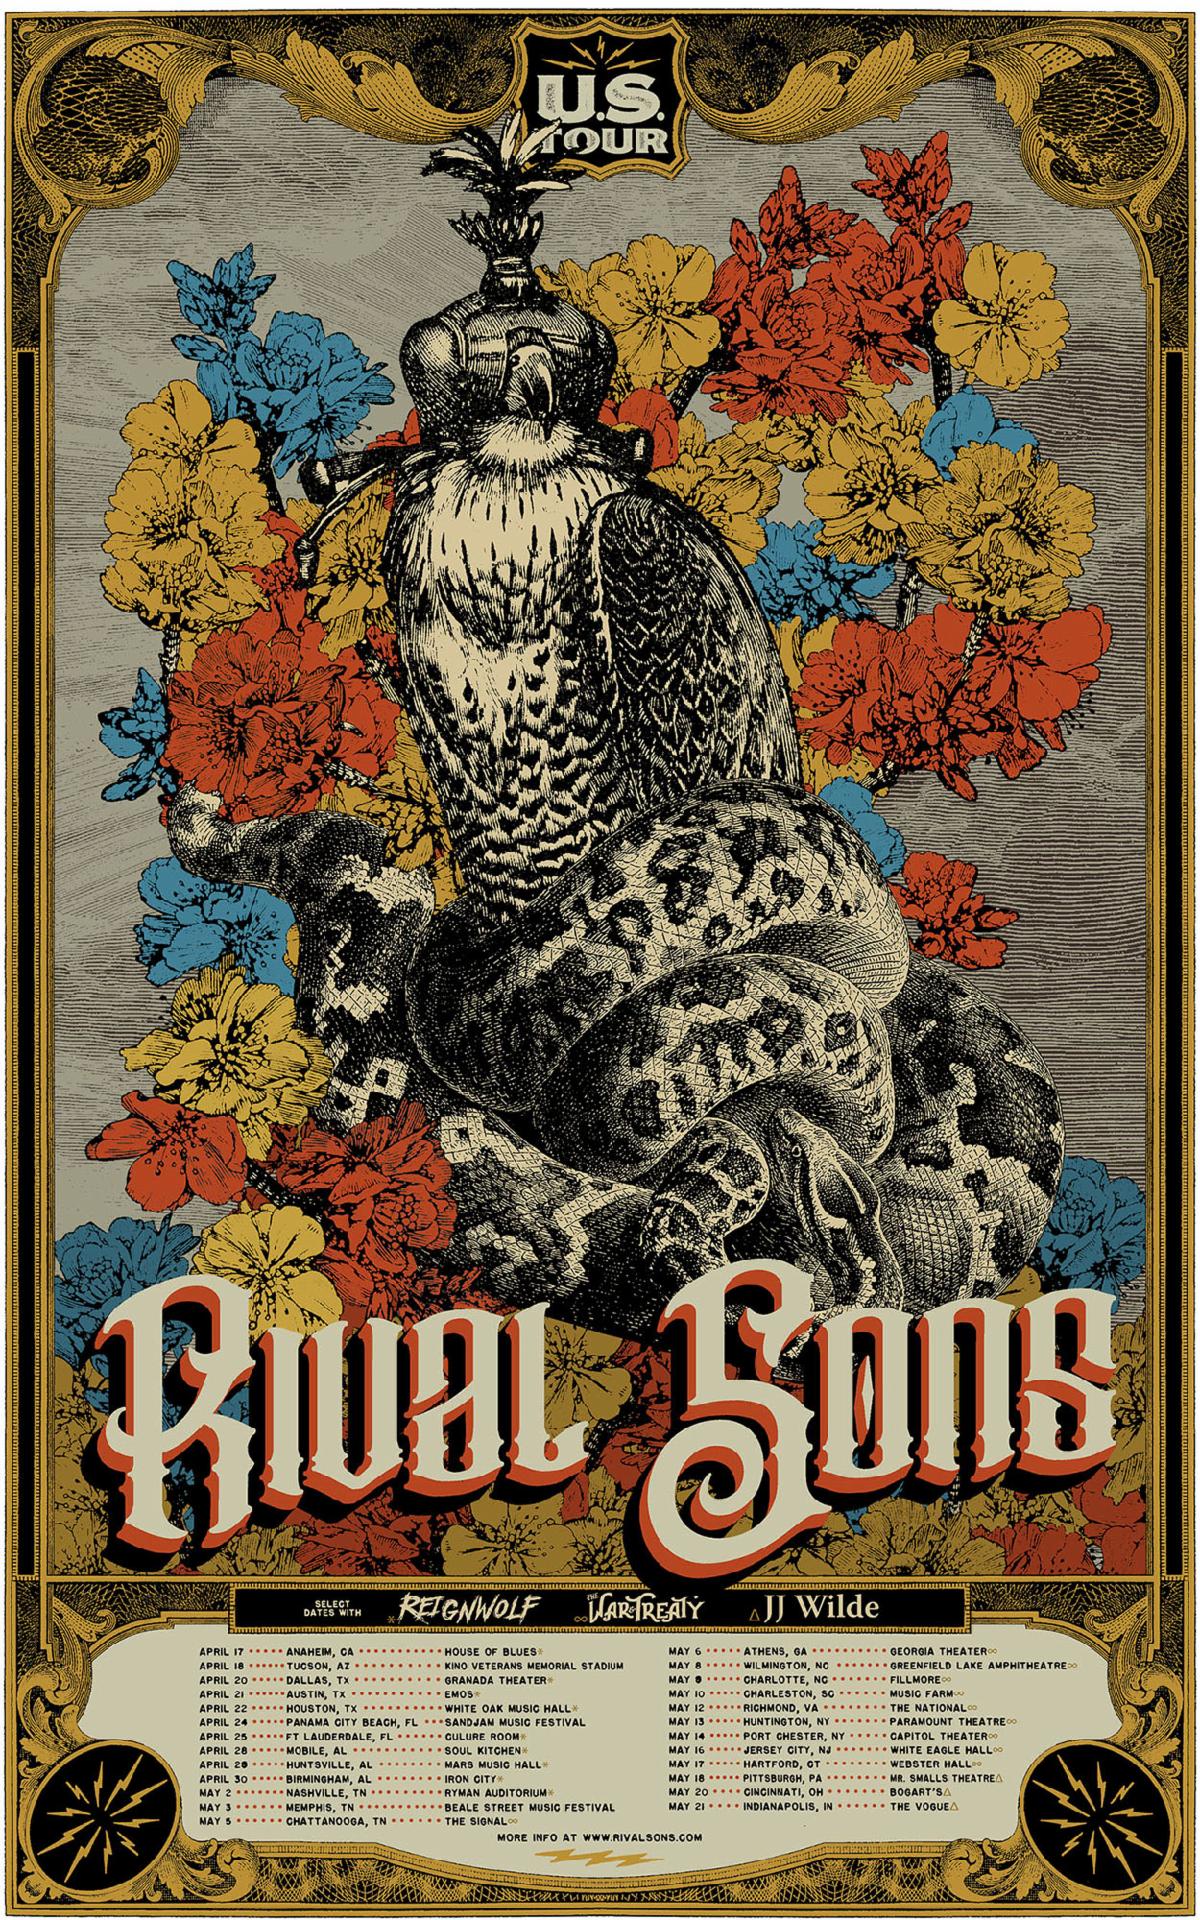 RIVAL SONS ANNOUNCE NEW NORTH AMERICAN TOUR